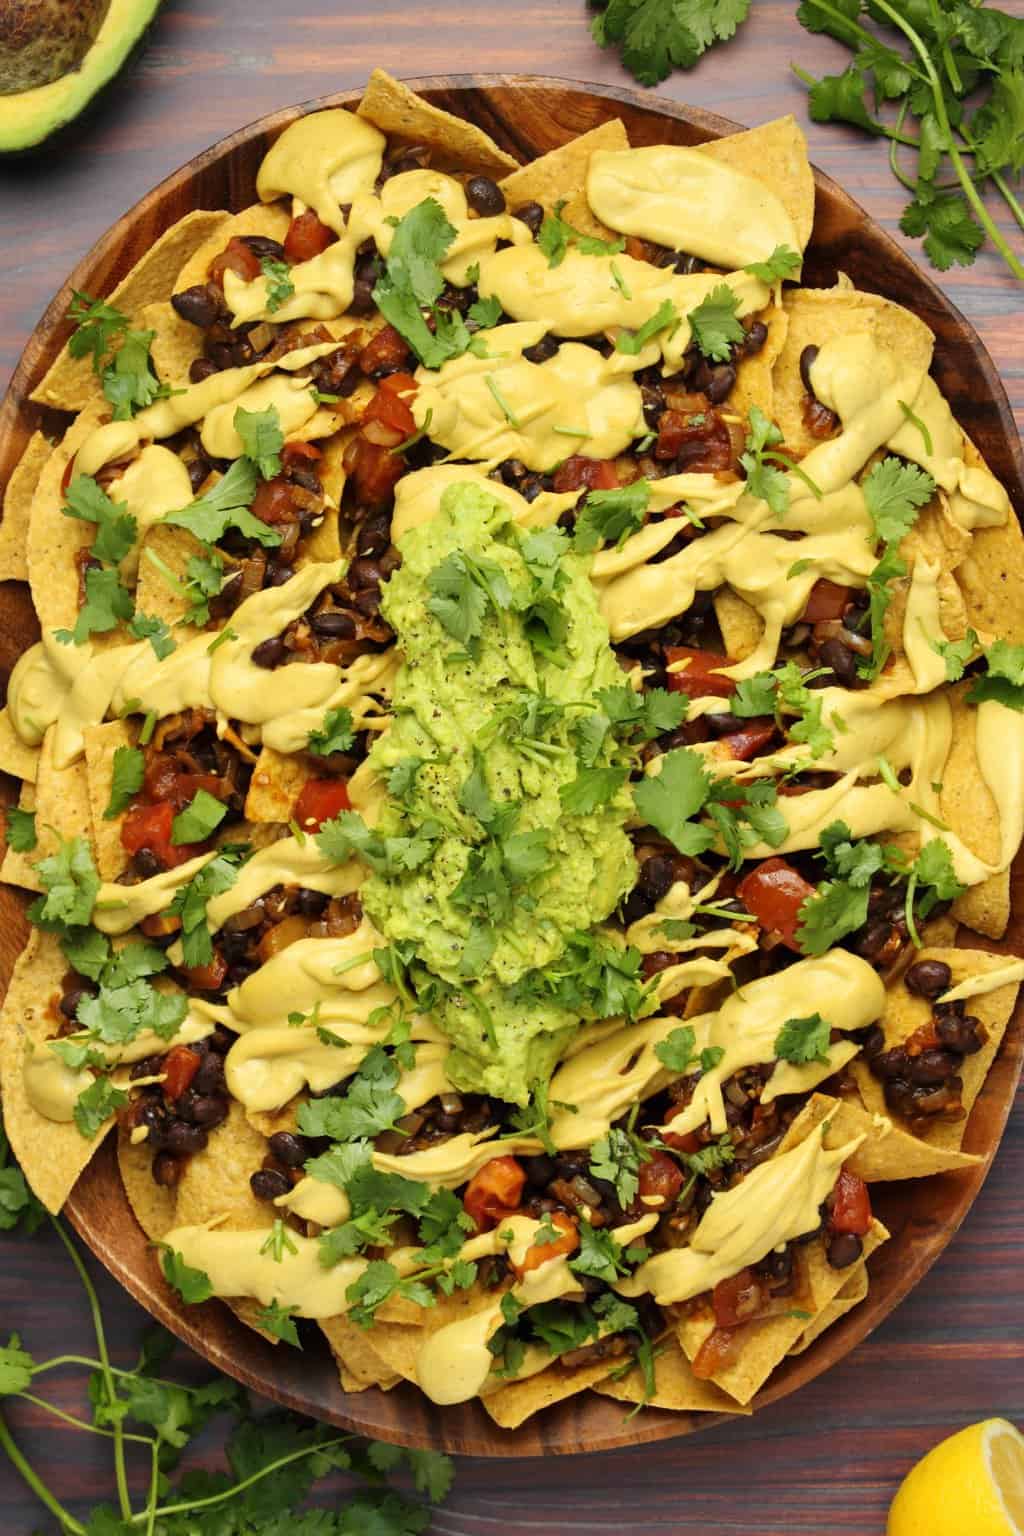 Vegan nacho cheese poured over fully loaded nachos with black beans, salsa and guacamole. 